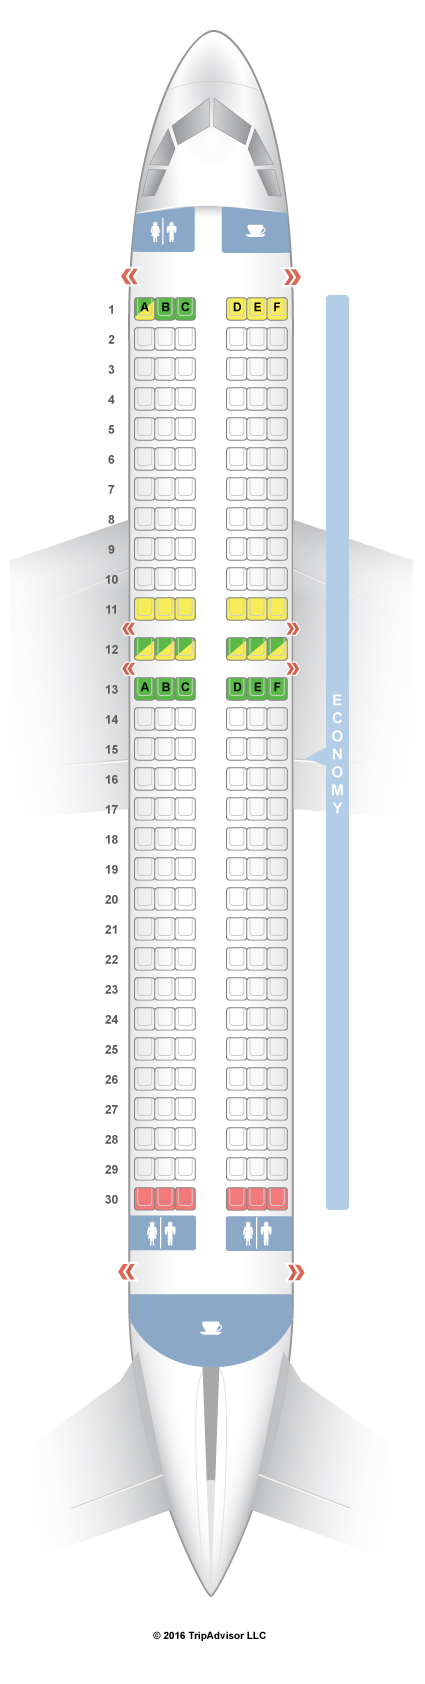 a380 chart airbus a320 seating